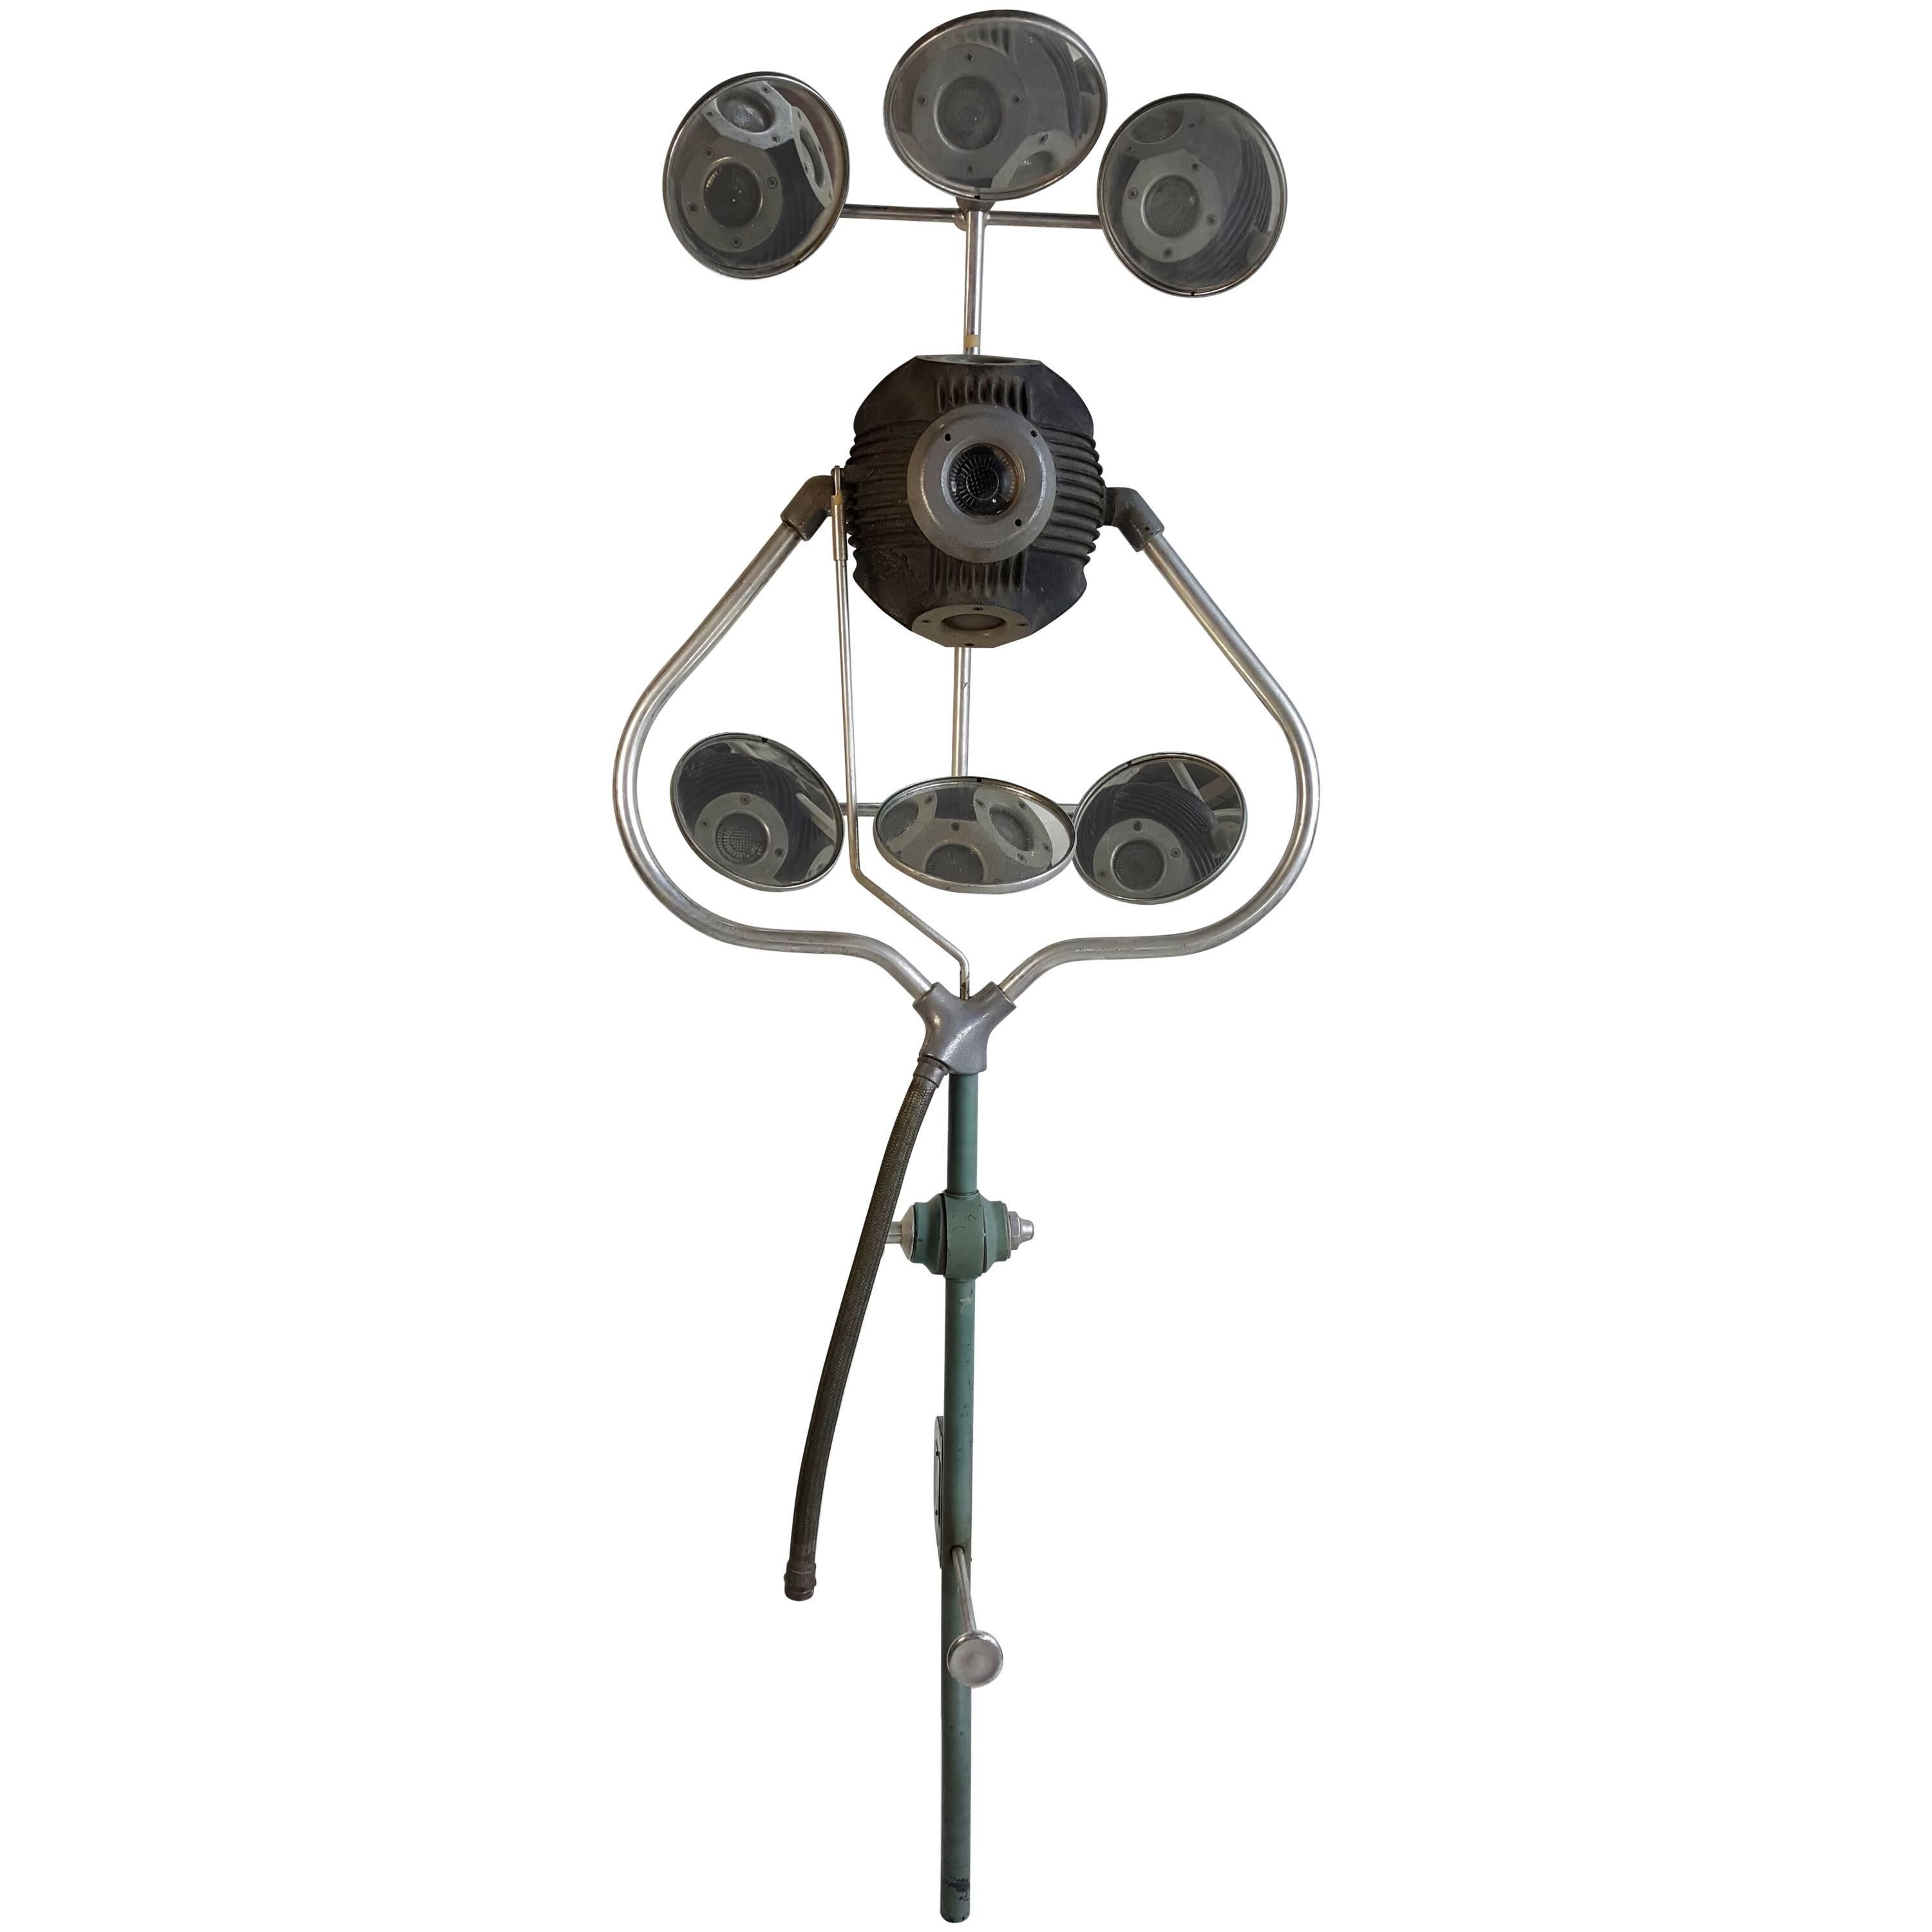 Monumental Antique Industrial Operay Multibeam Surgical Lamp For Sale